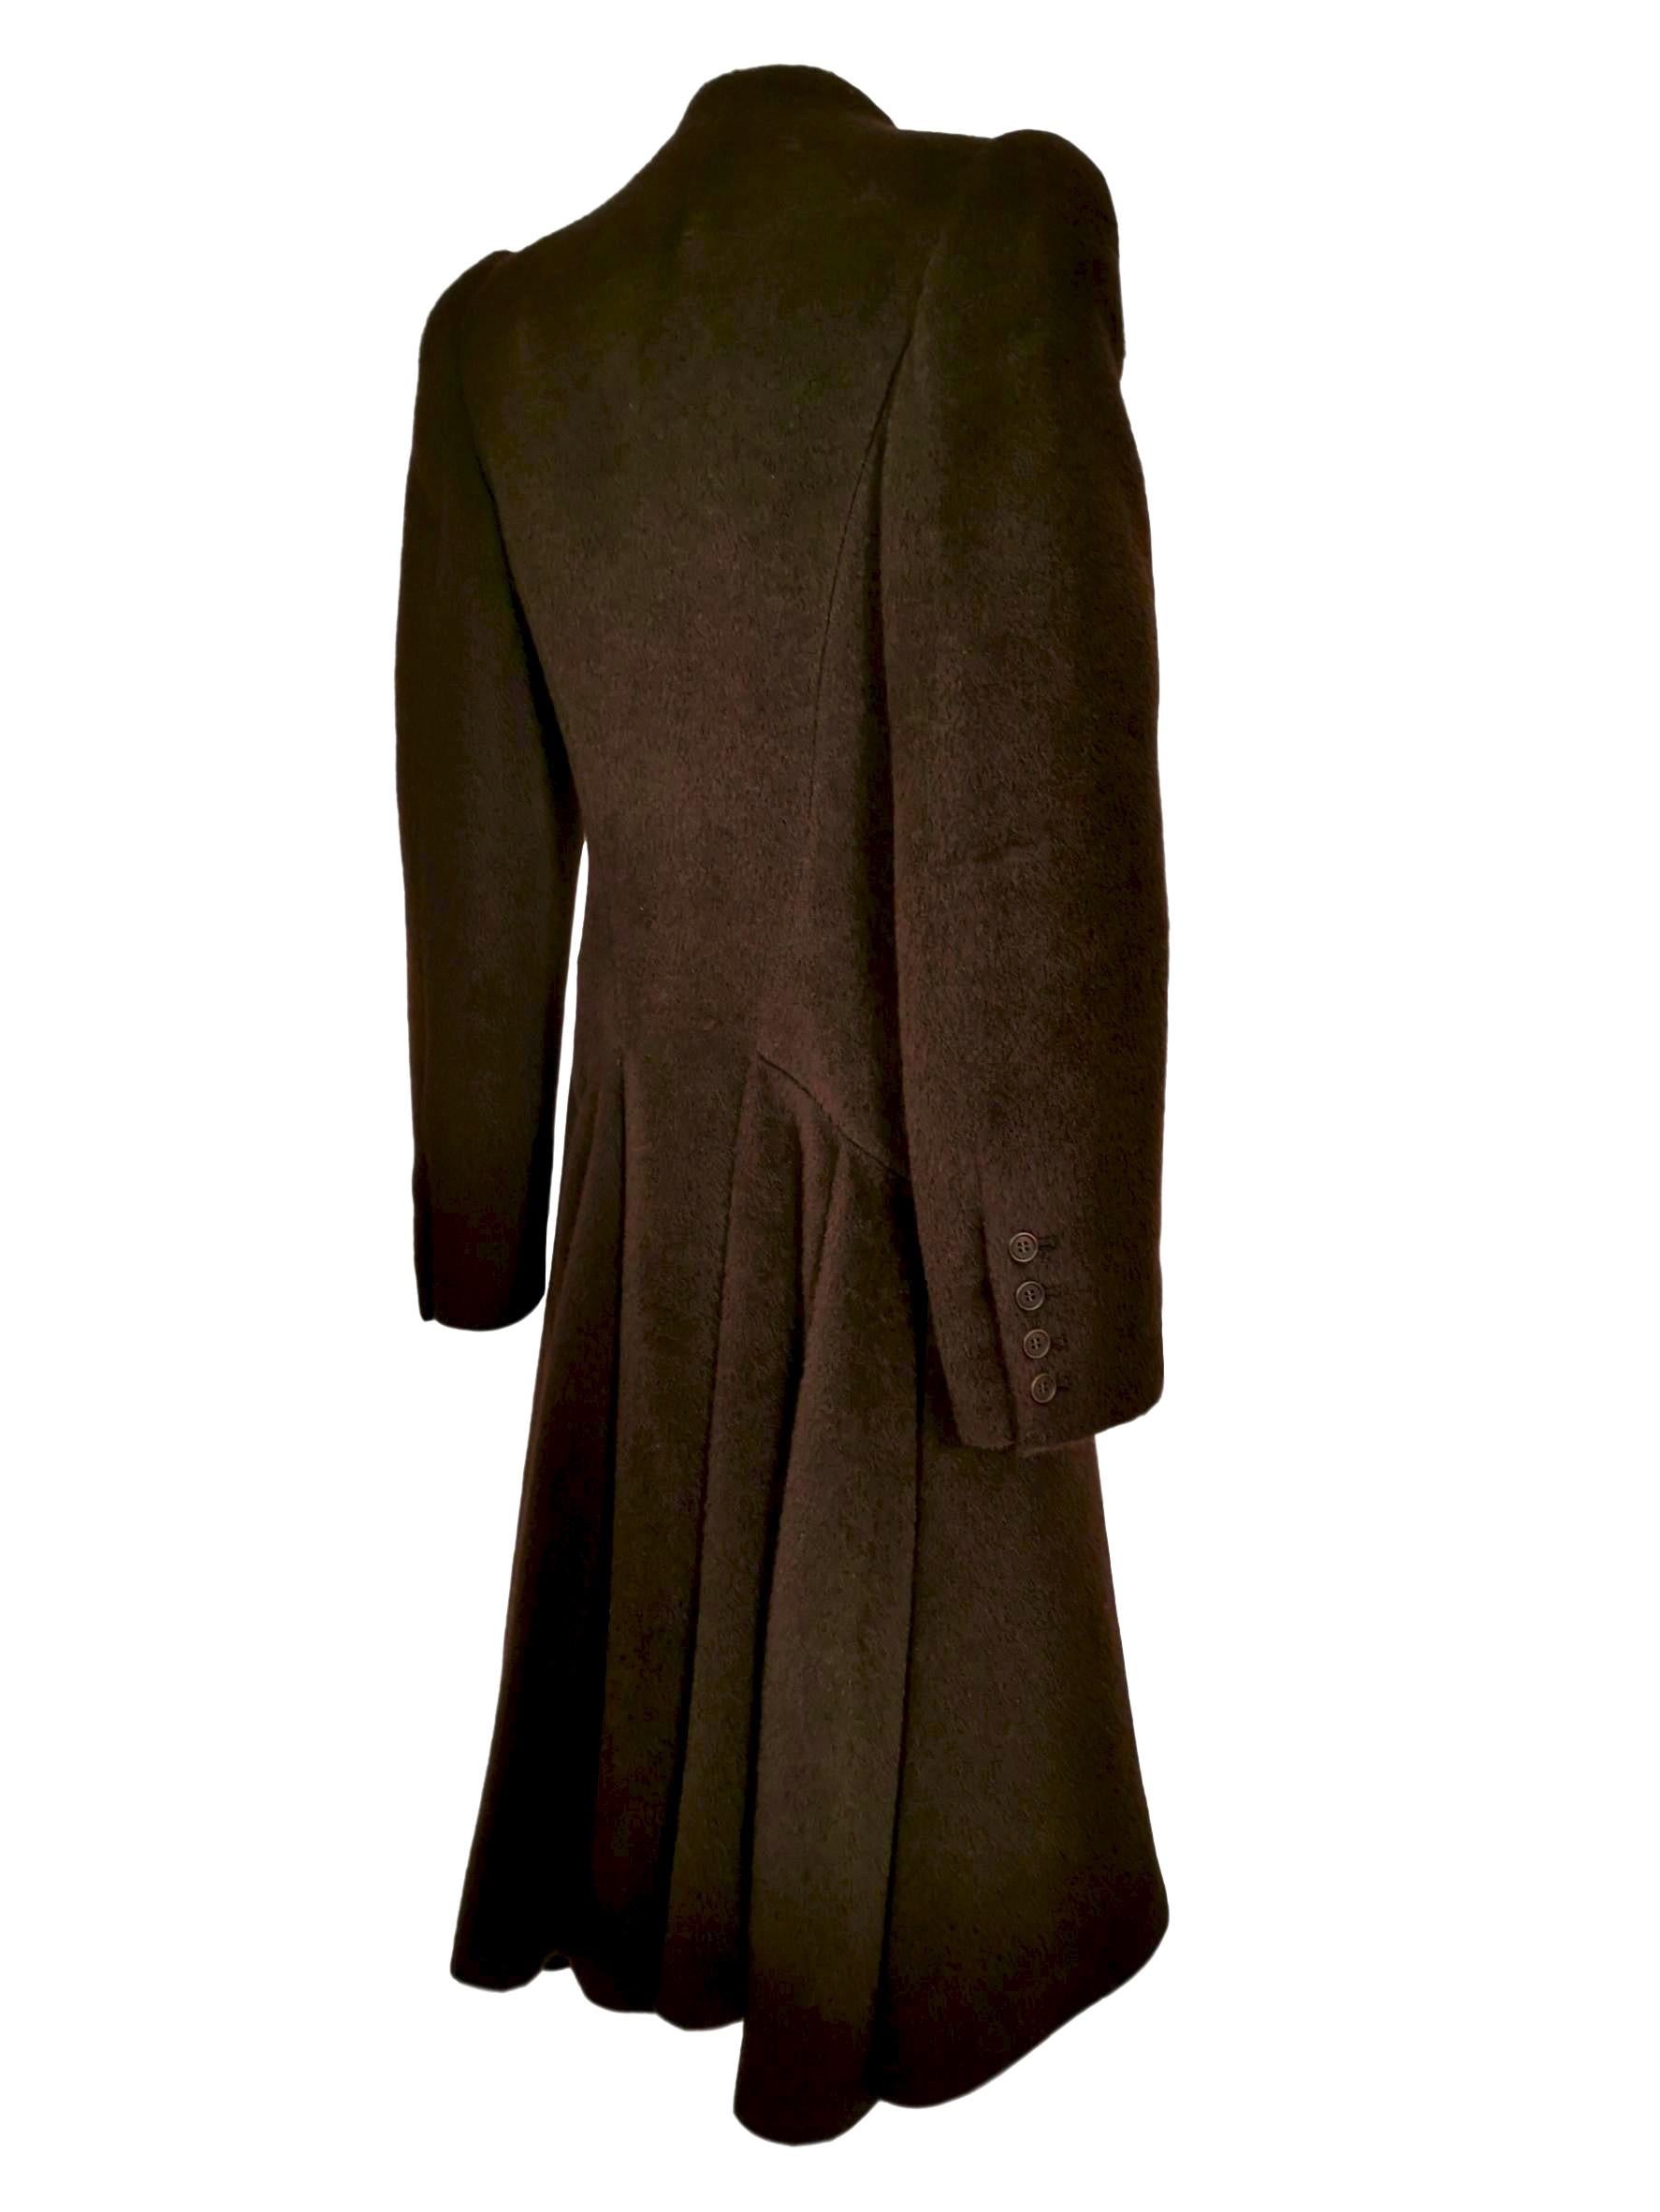 Alexander McQueen 1998 Mohair and Alpaca Joan Collection Coat In Excellent Condition For Sale In Bath, GB